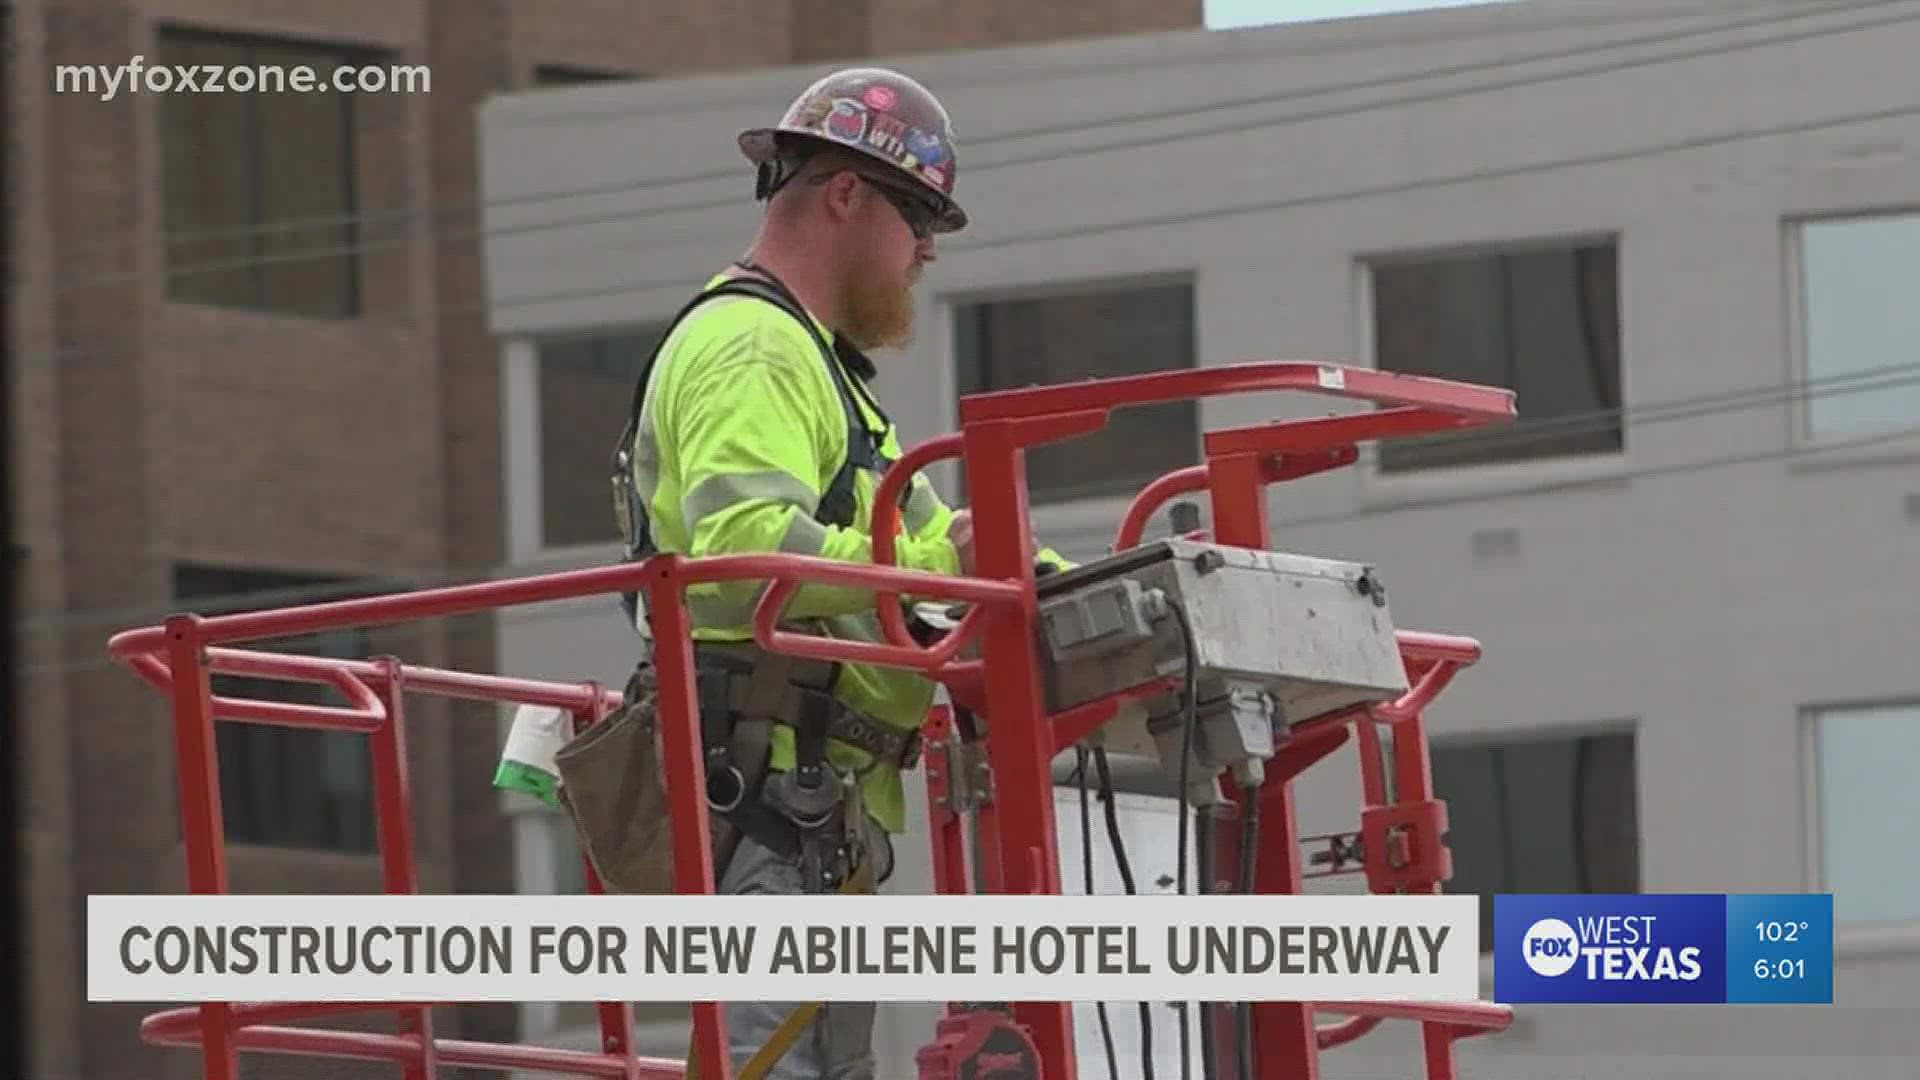 Hilton is making its way back to Abilene, hoping to increase tourism and continue revitalizing downtown.